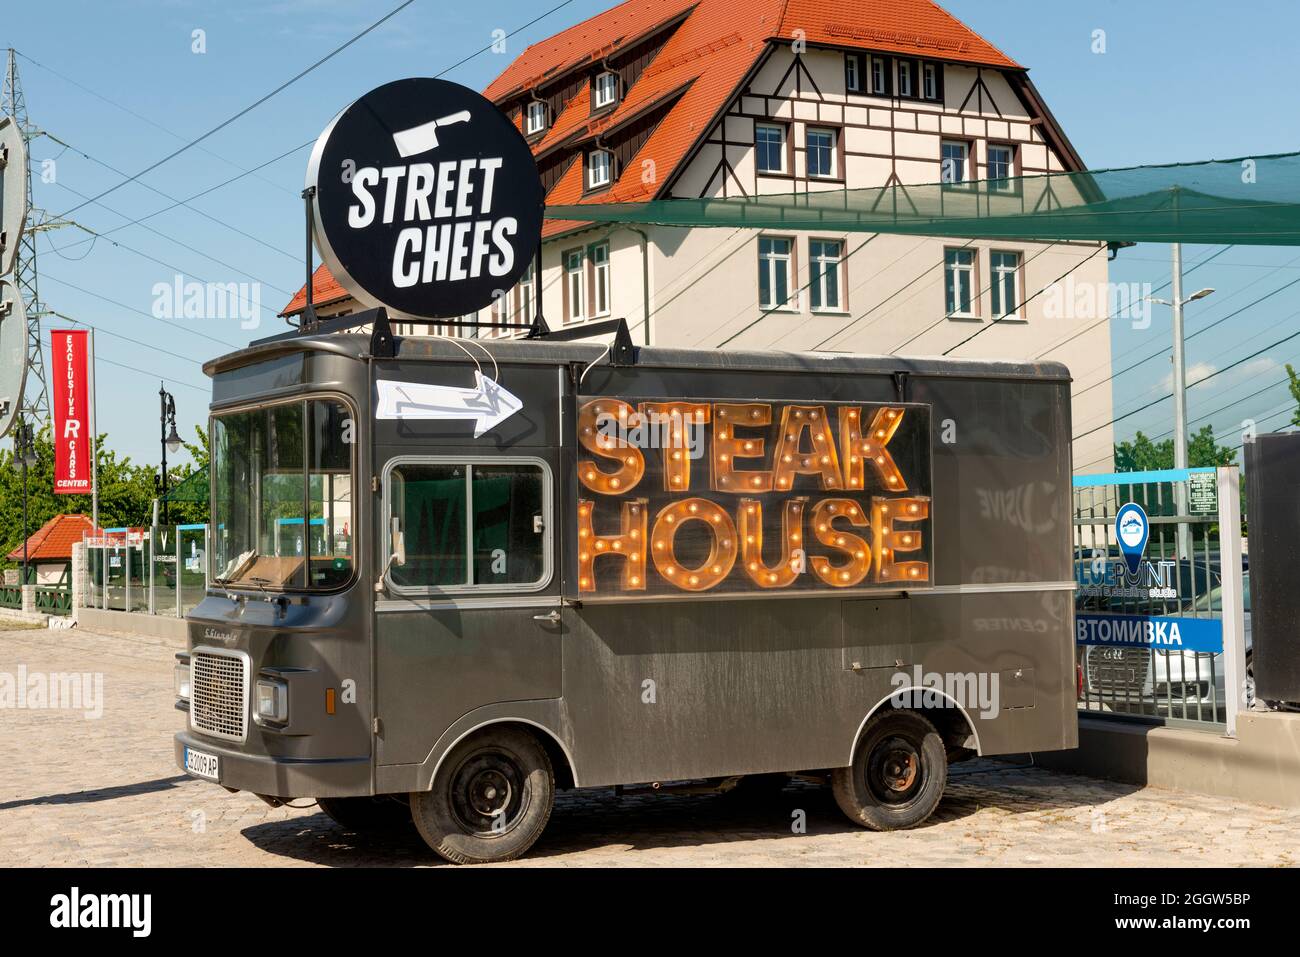 Fast food business Street Chefs Steak House pointed arrow advertisement on vintage Fiat 241 T San Giorgio truck by a road near Sofia, Bulgaria Stock Photo